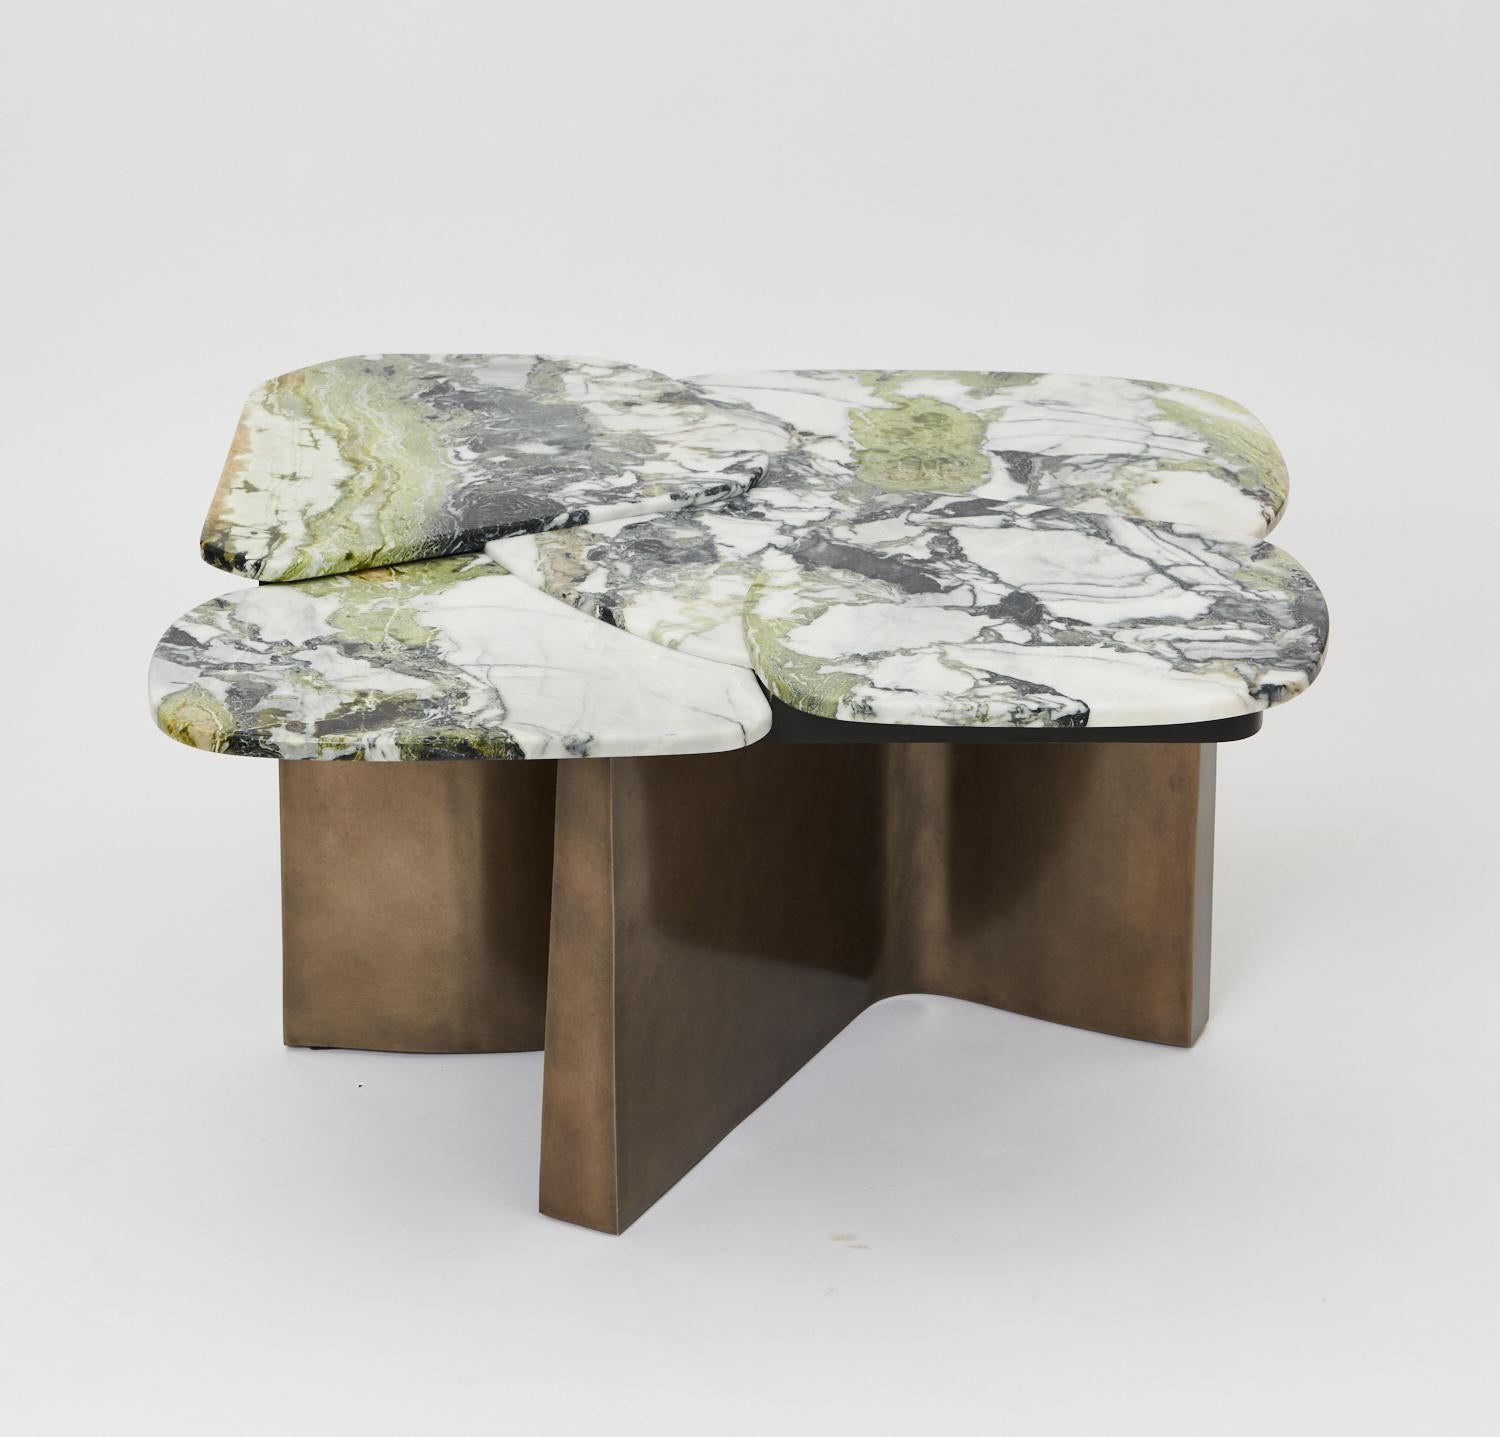 This marble and metal table found its origins in an abstract painting full of the dynamic of lines. The designer manages to pile up the four stone blocks through which the emerald green-veined marble presents a moving texture.